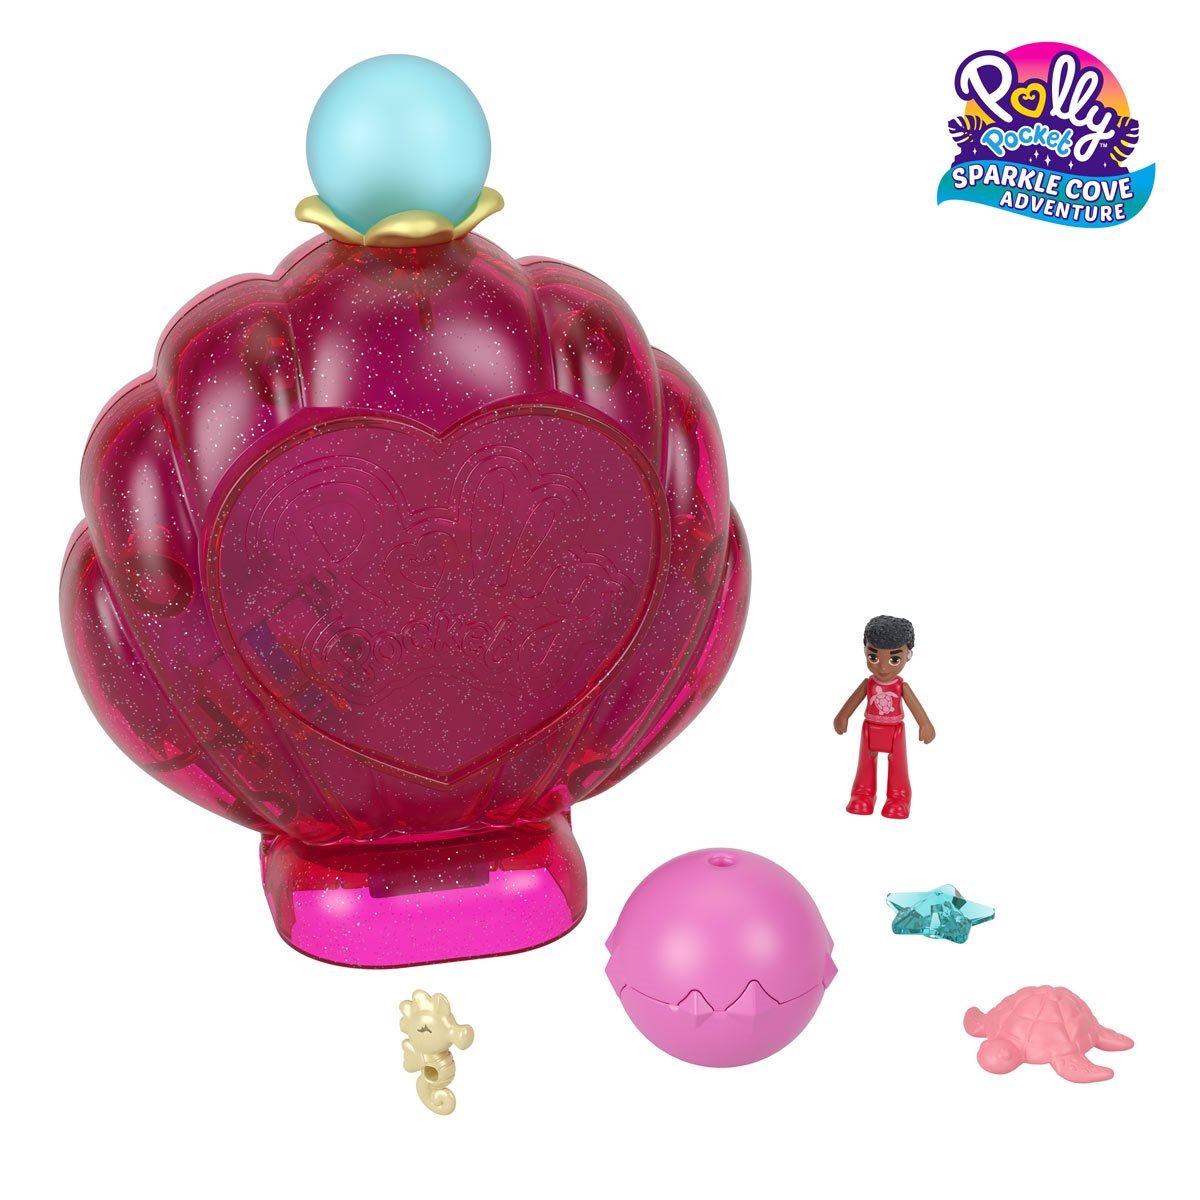 Polly Pocket sand Fun Surprises with doll Mattel